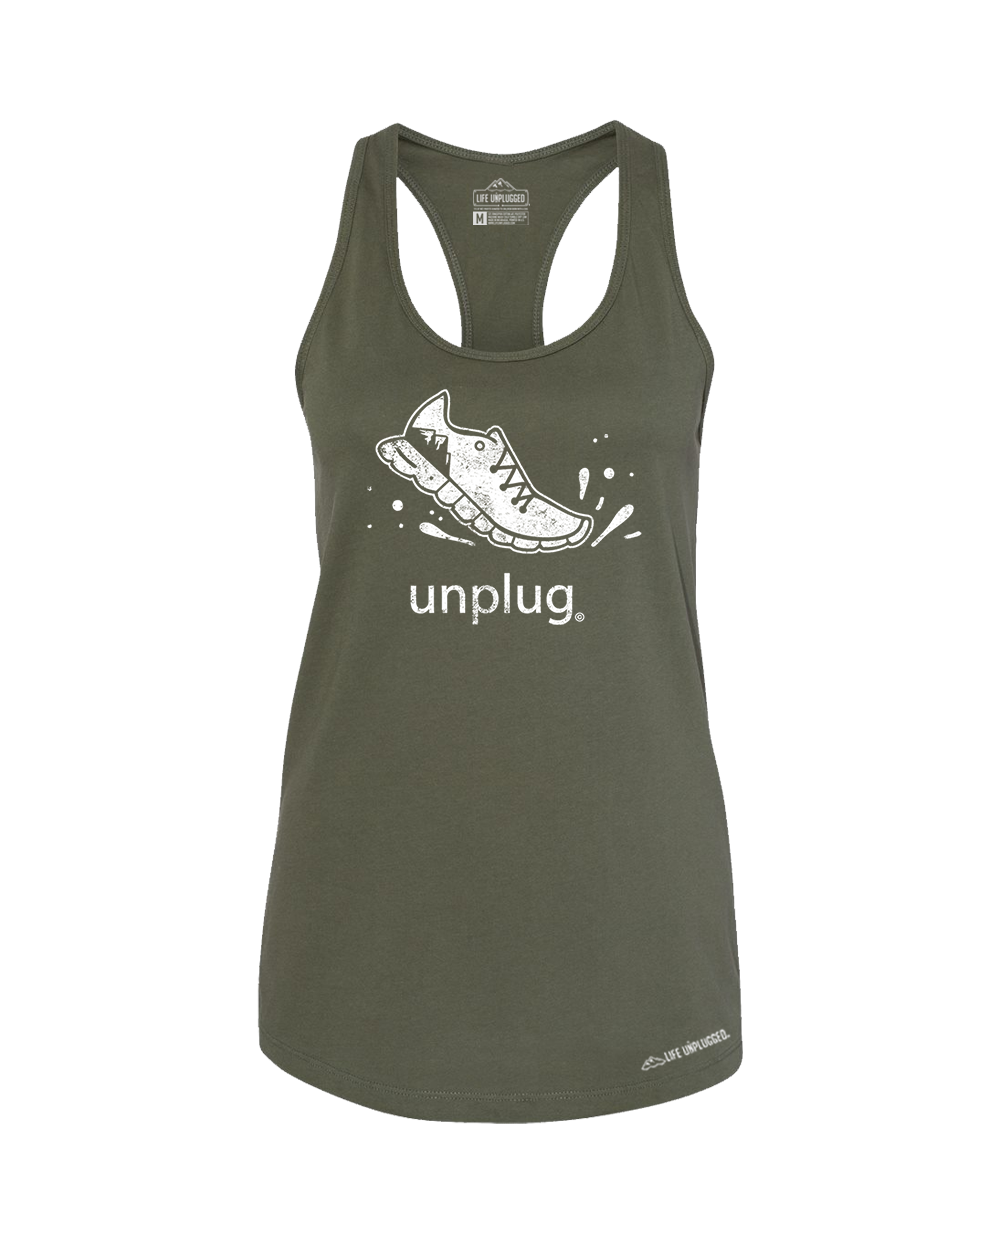 Running Premium Women's Relaxed Fit Racerback Tank Top - Life Unplugged